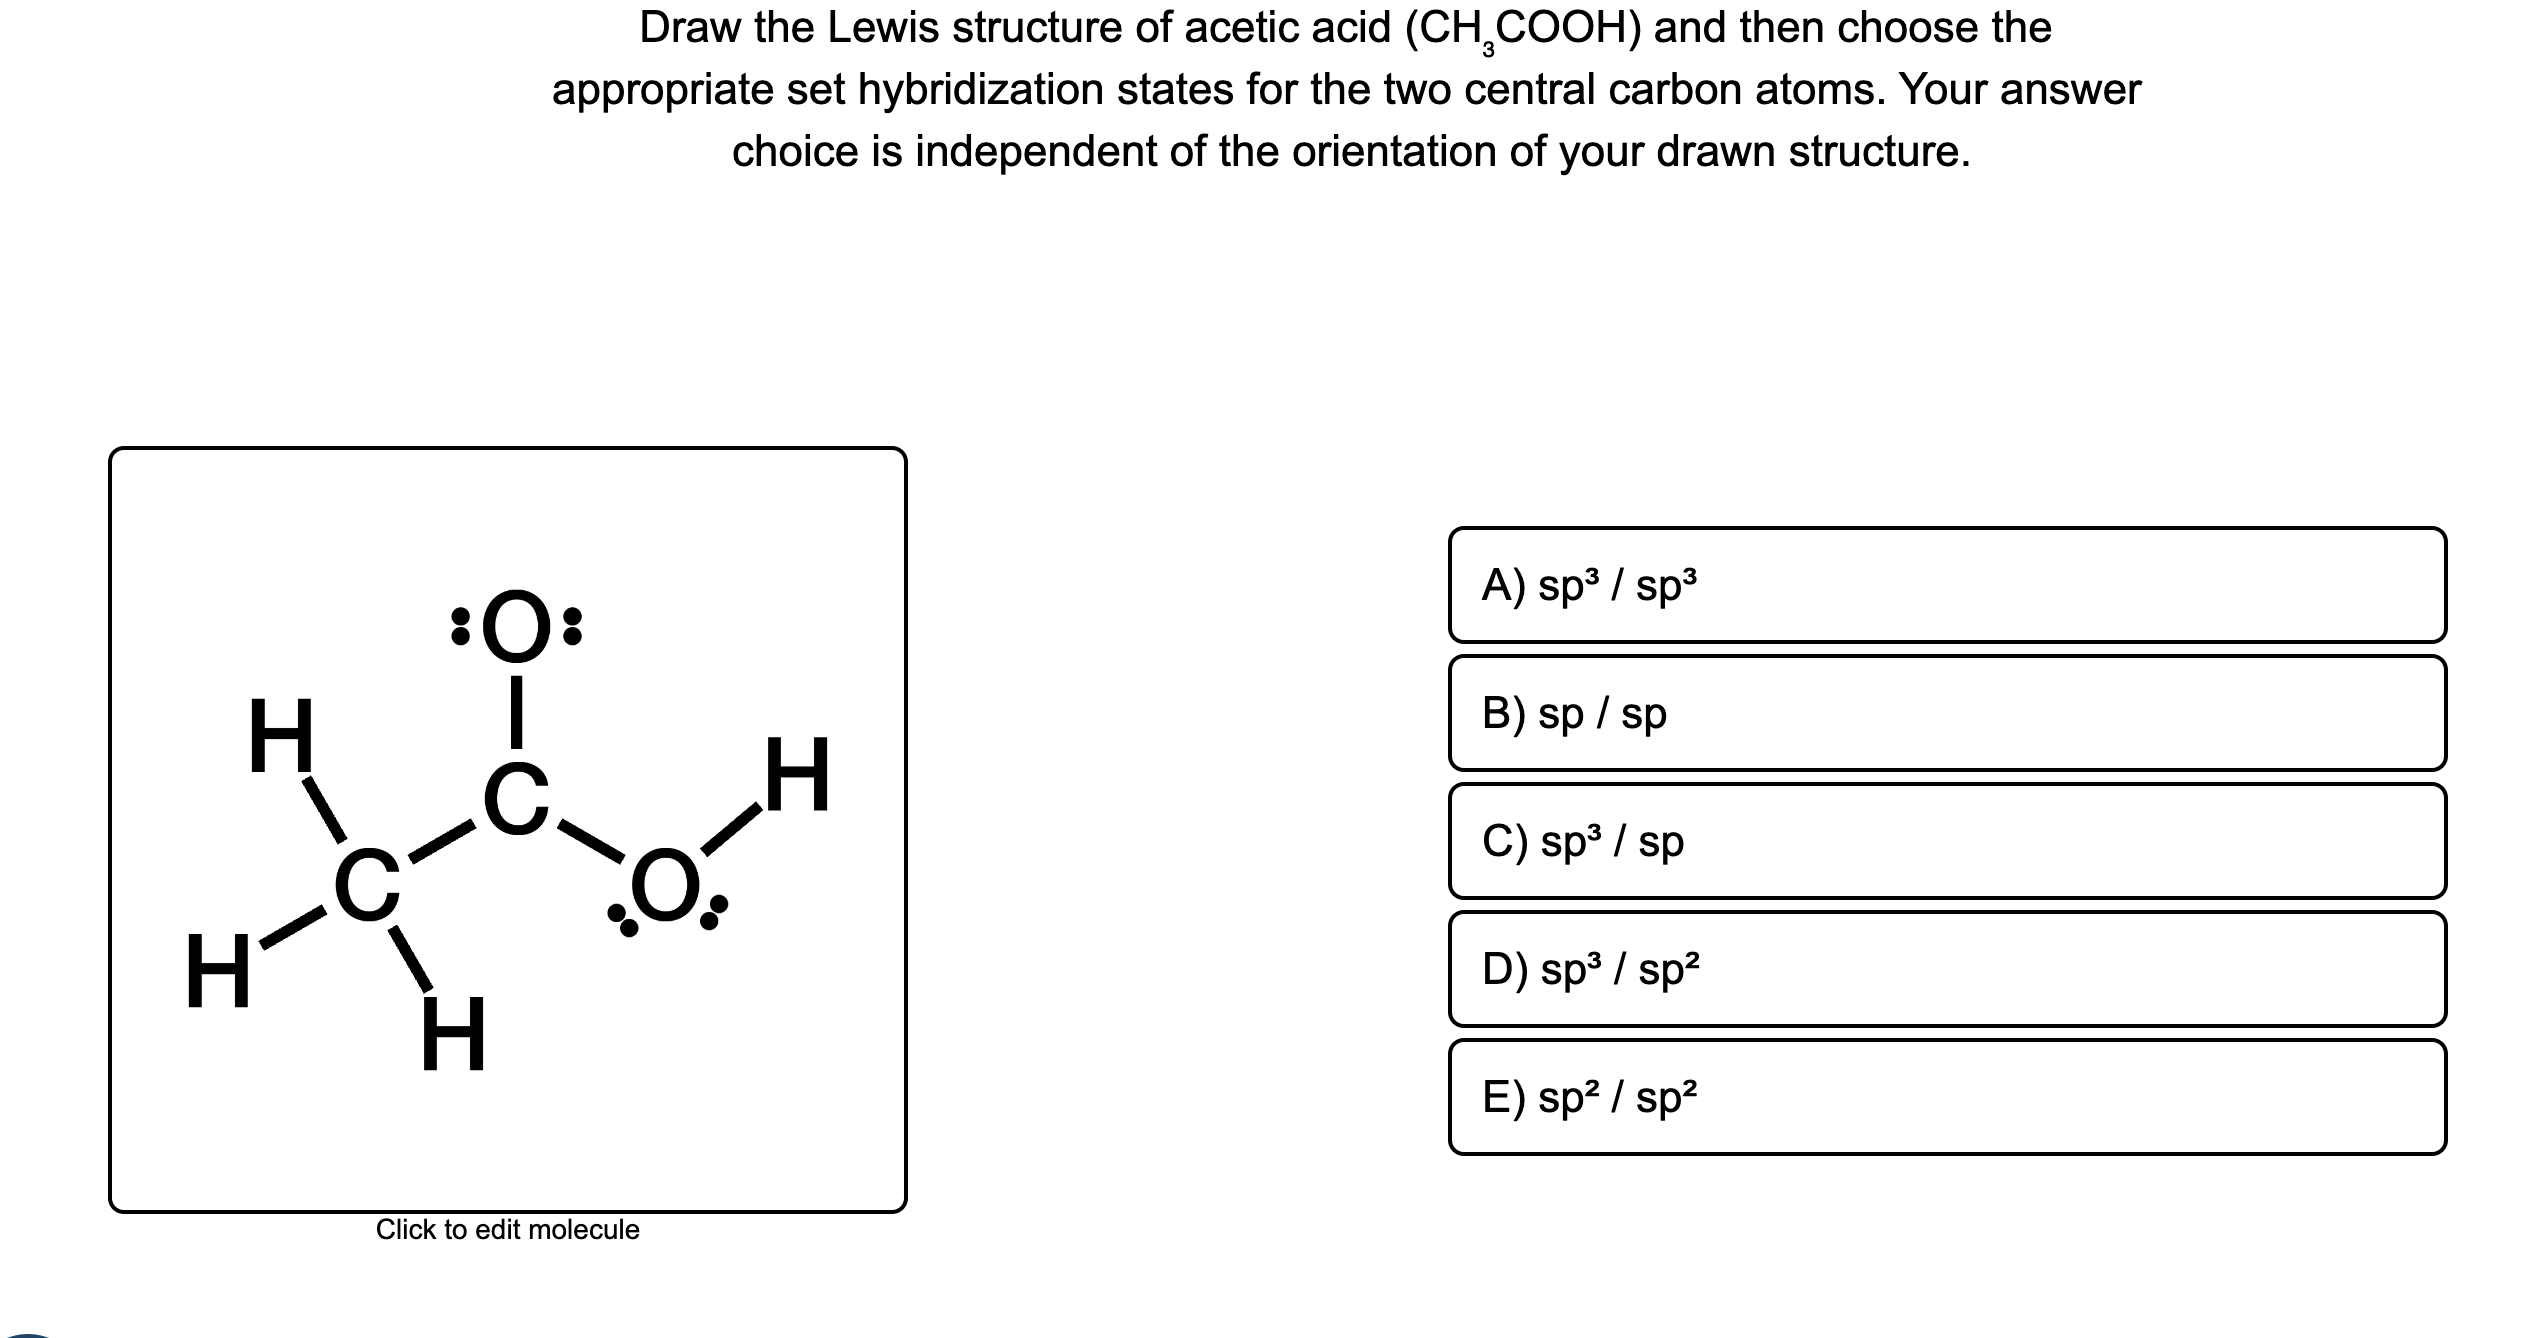 [Solved]: Draw the Lewis structure of acetic acid (CH3COOH)